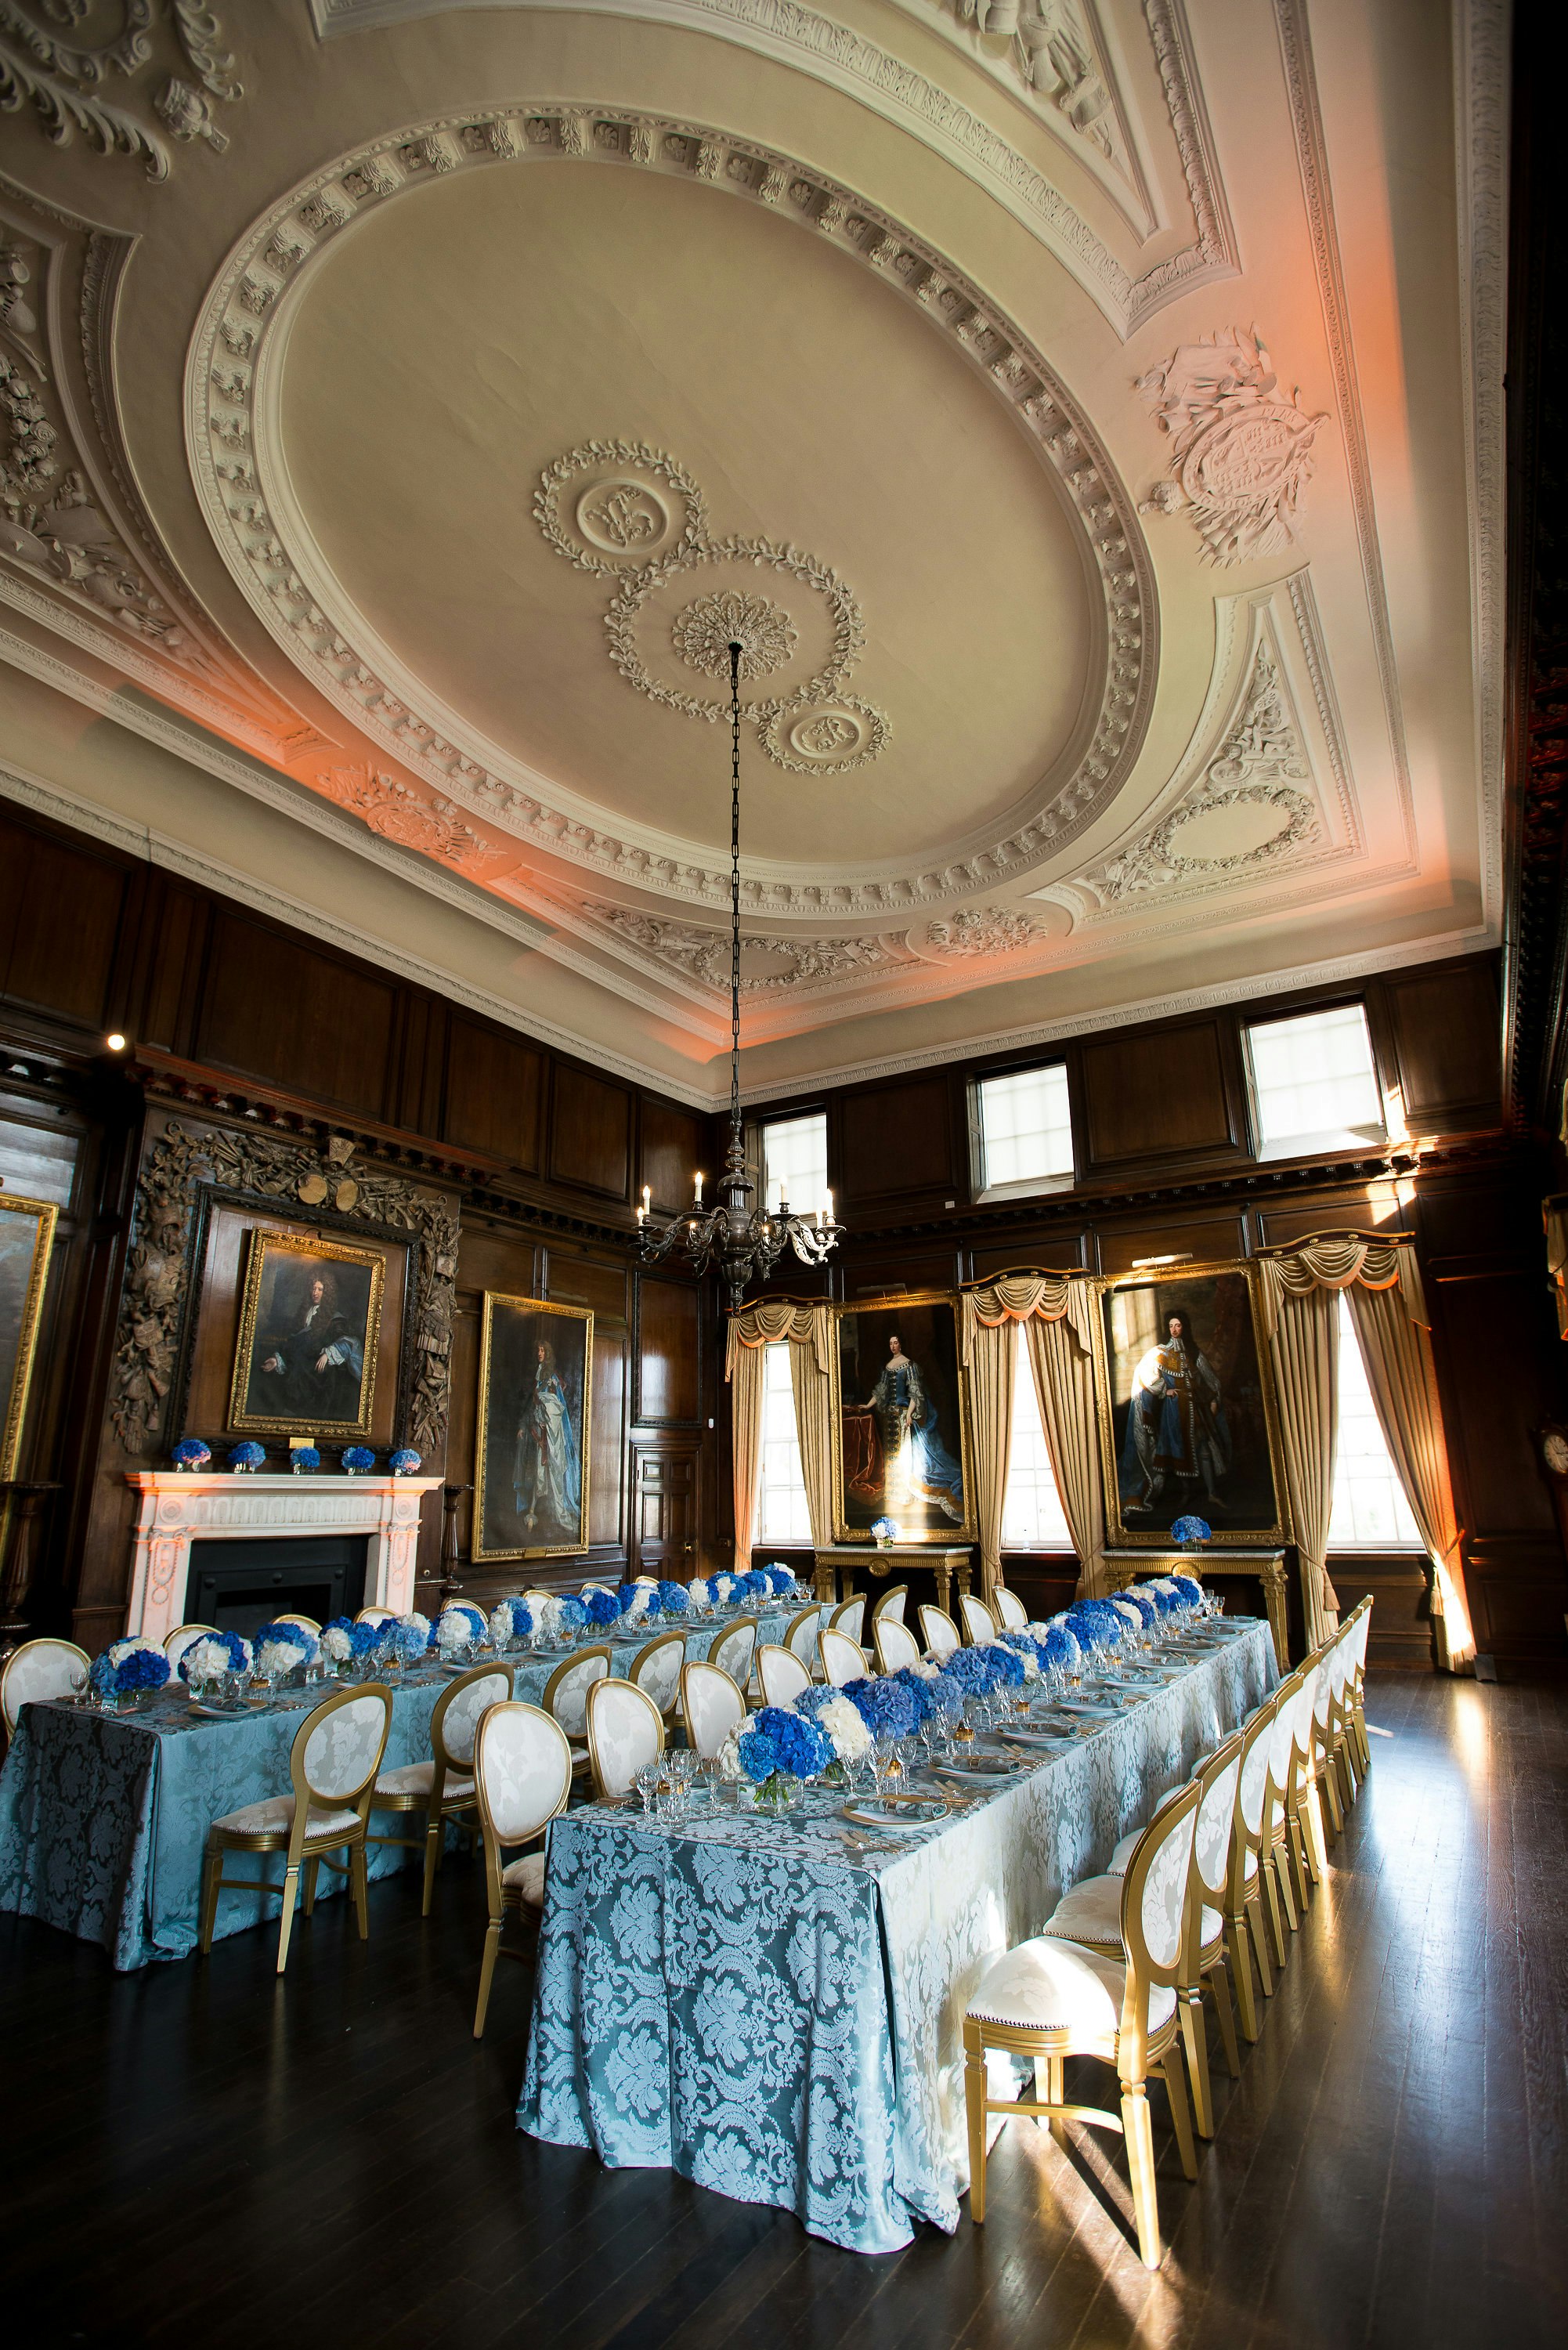 Royal Hospital Chelsea - The State Apartments image 4